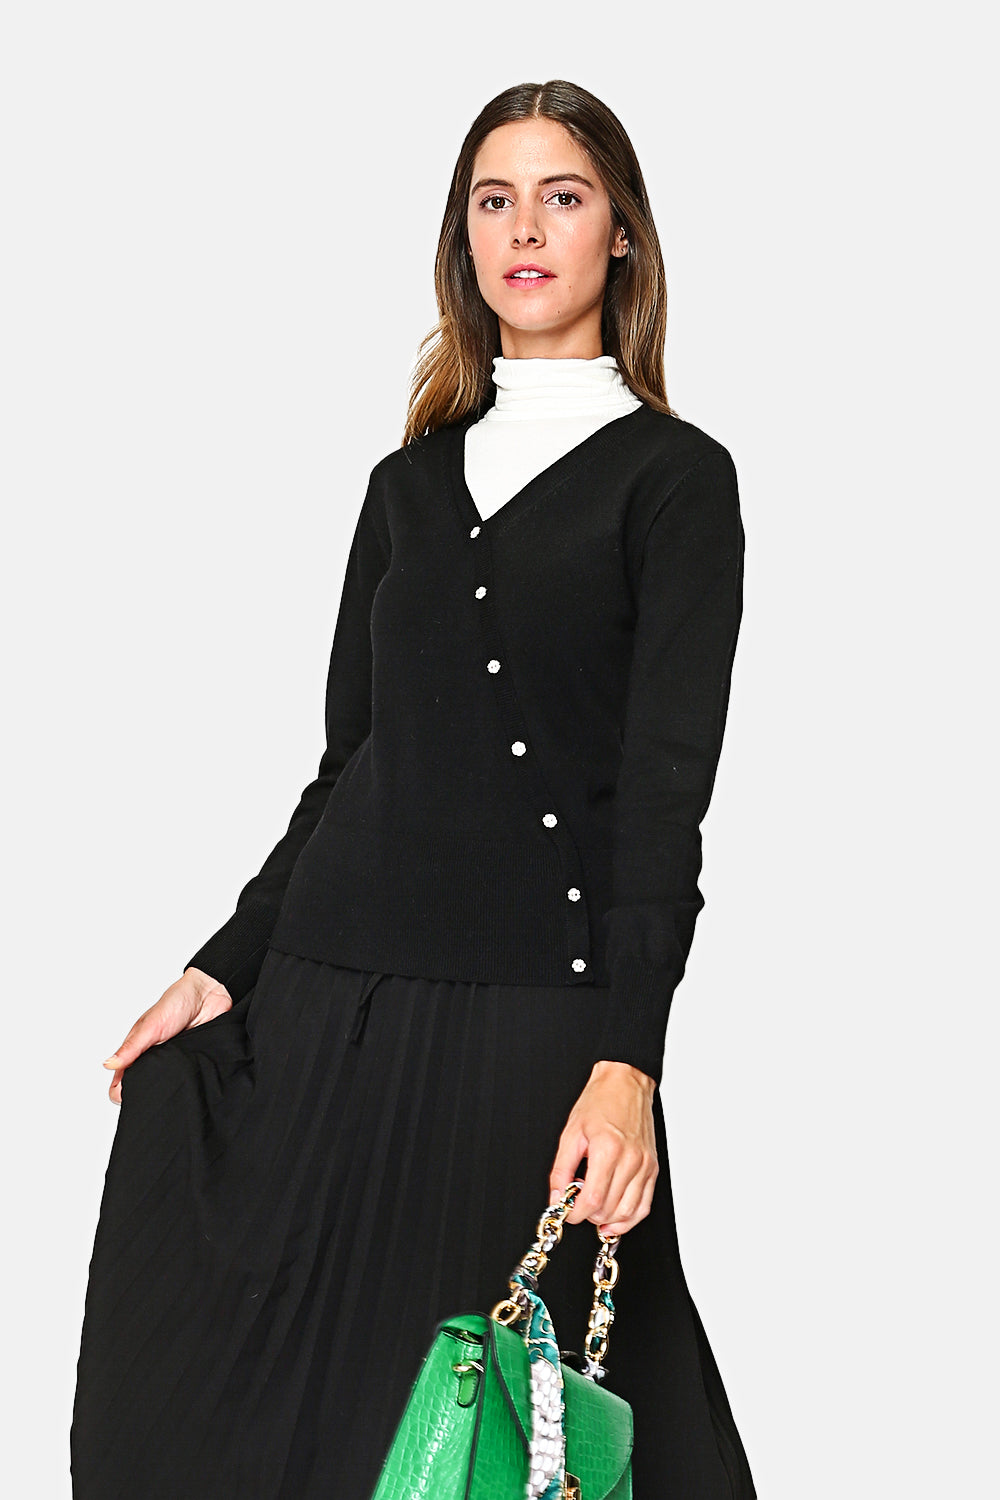 V-neck sweater, crossed with fancy buttons on the front